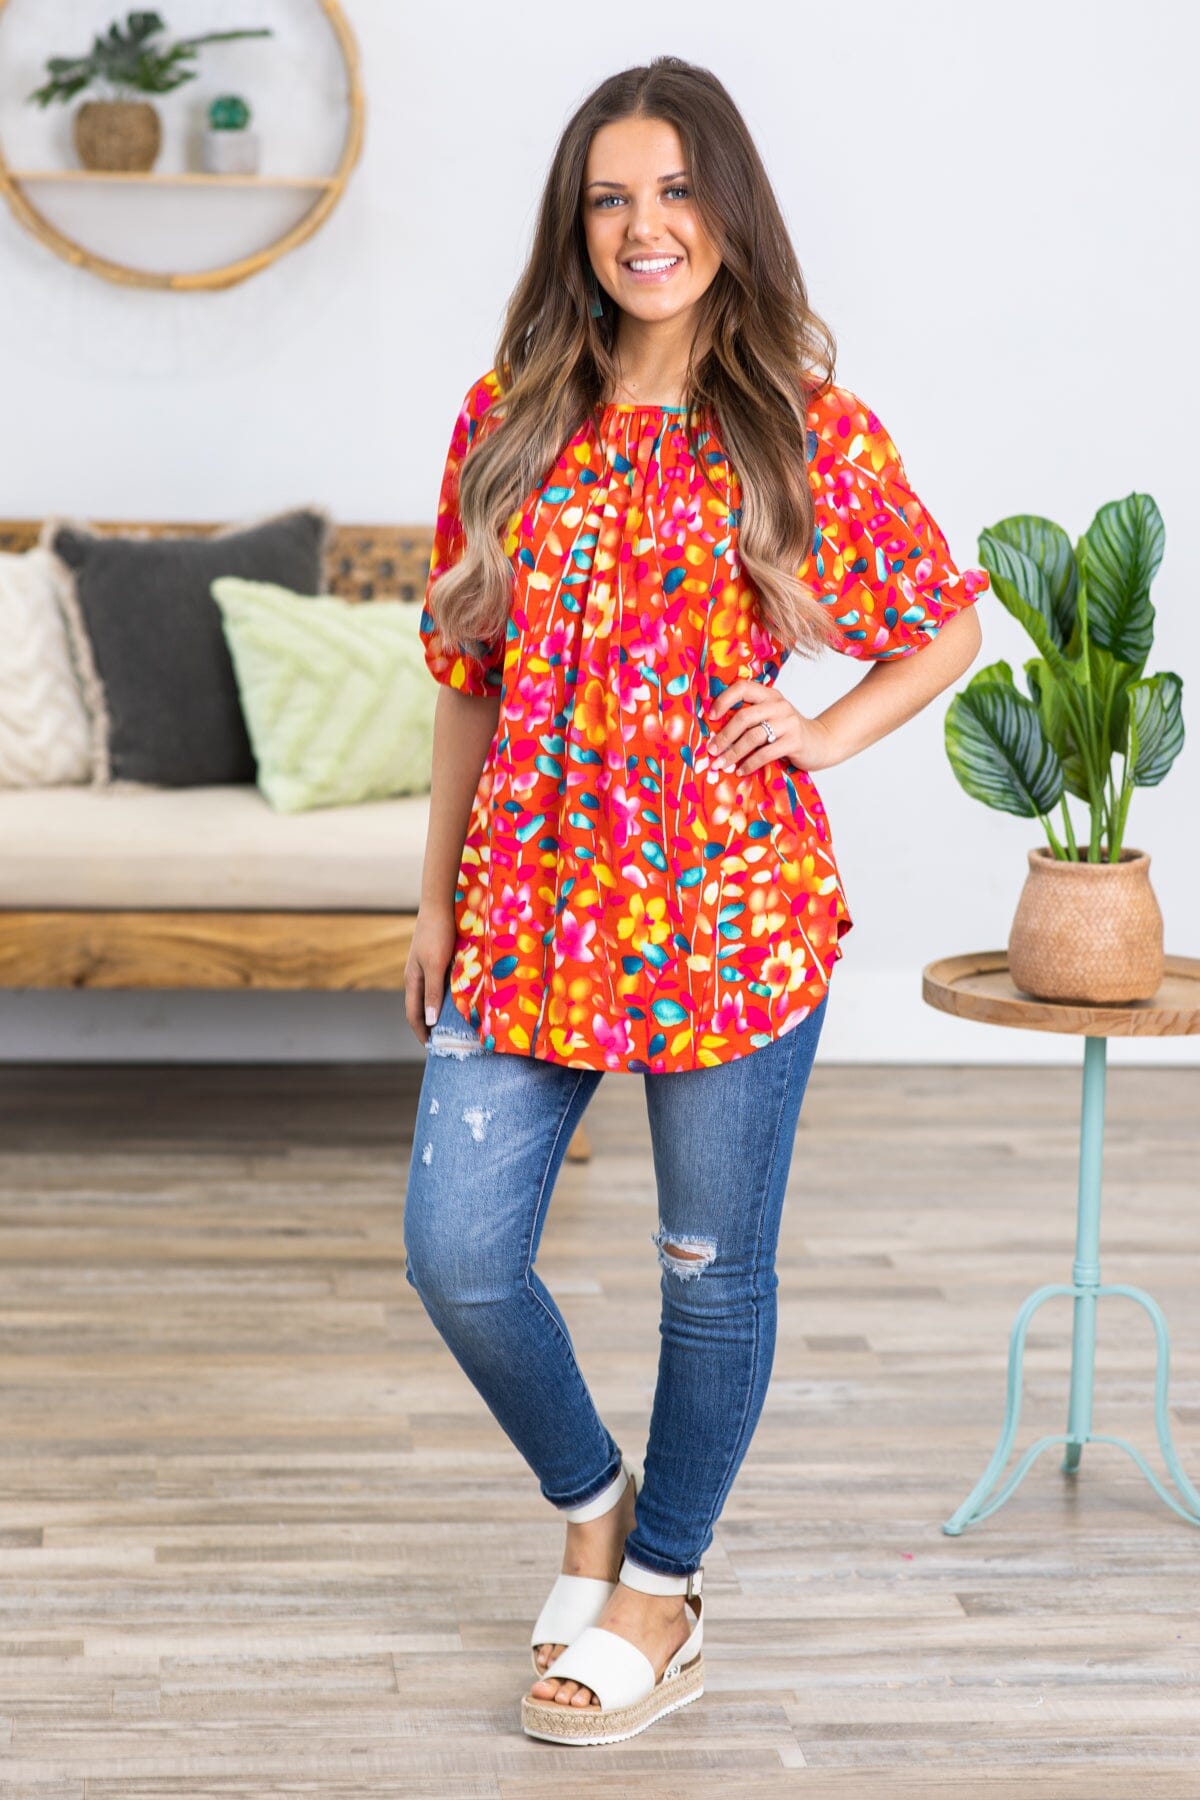 Red and Yellow Multicolor Abstract Floral Top - Filly Flair